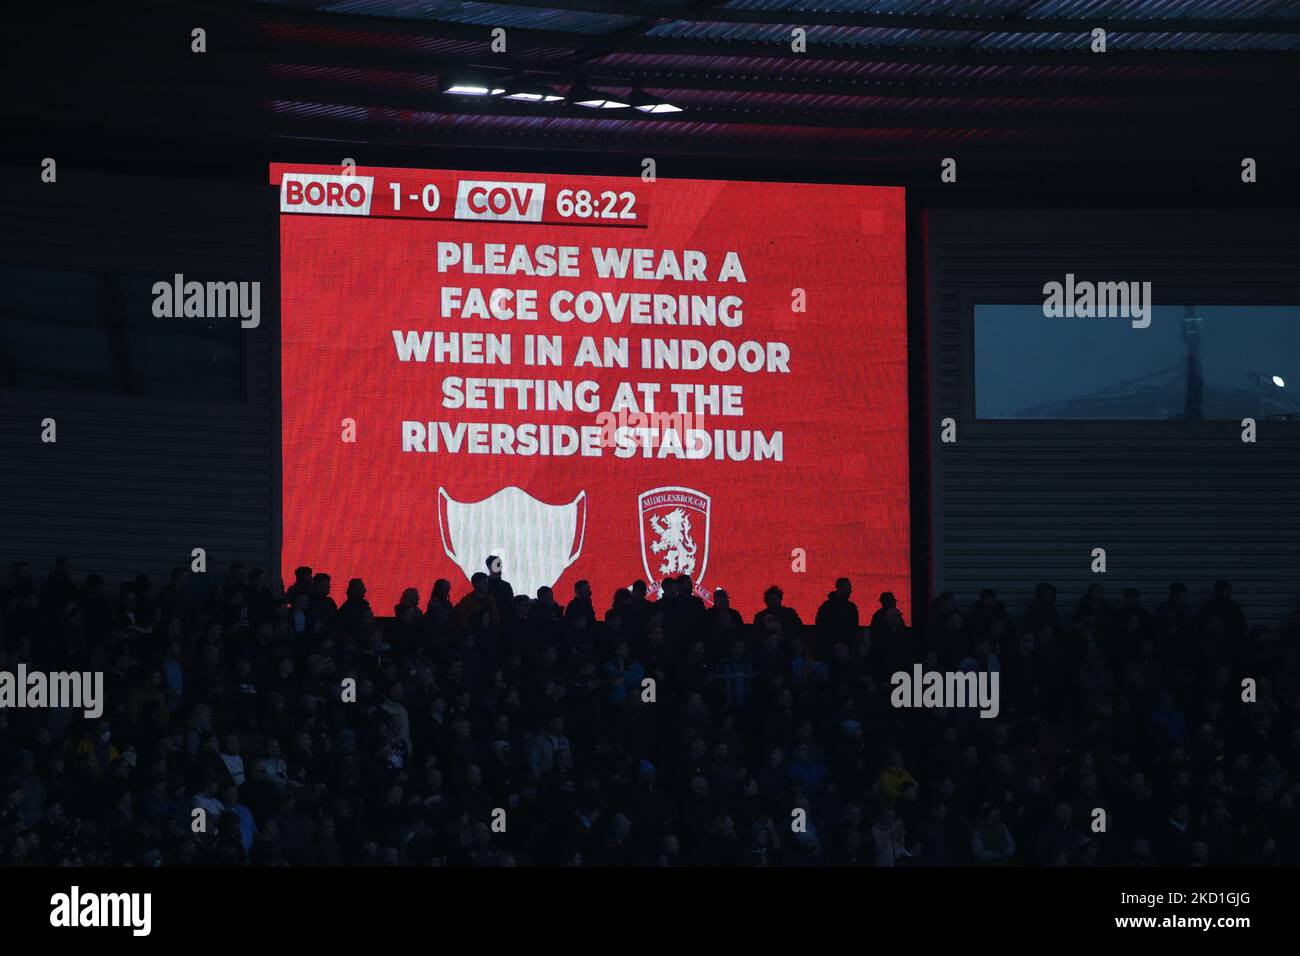 Face Coverings are still advised at Riverside Stadium despite restrictions being lifted during the Sky Bet Championship match between Middlesbrough and Coventry City at the Riverside Stadium, Middlesbrough on Saturday 29th January 2022. (Photo by Michael Driver/MI News/NurPhoto) Stock Photo